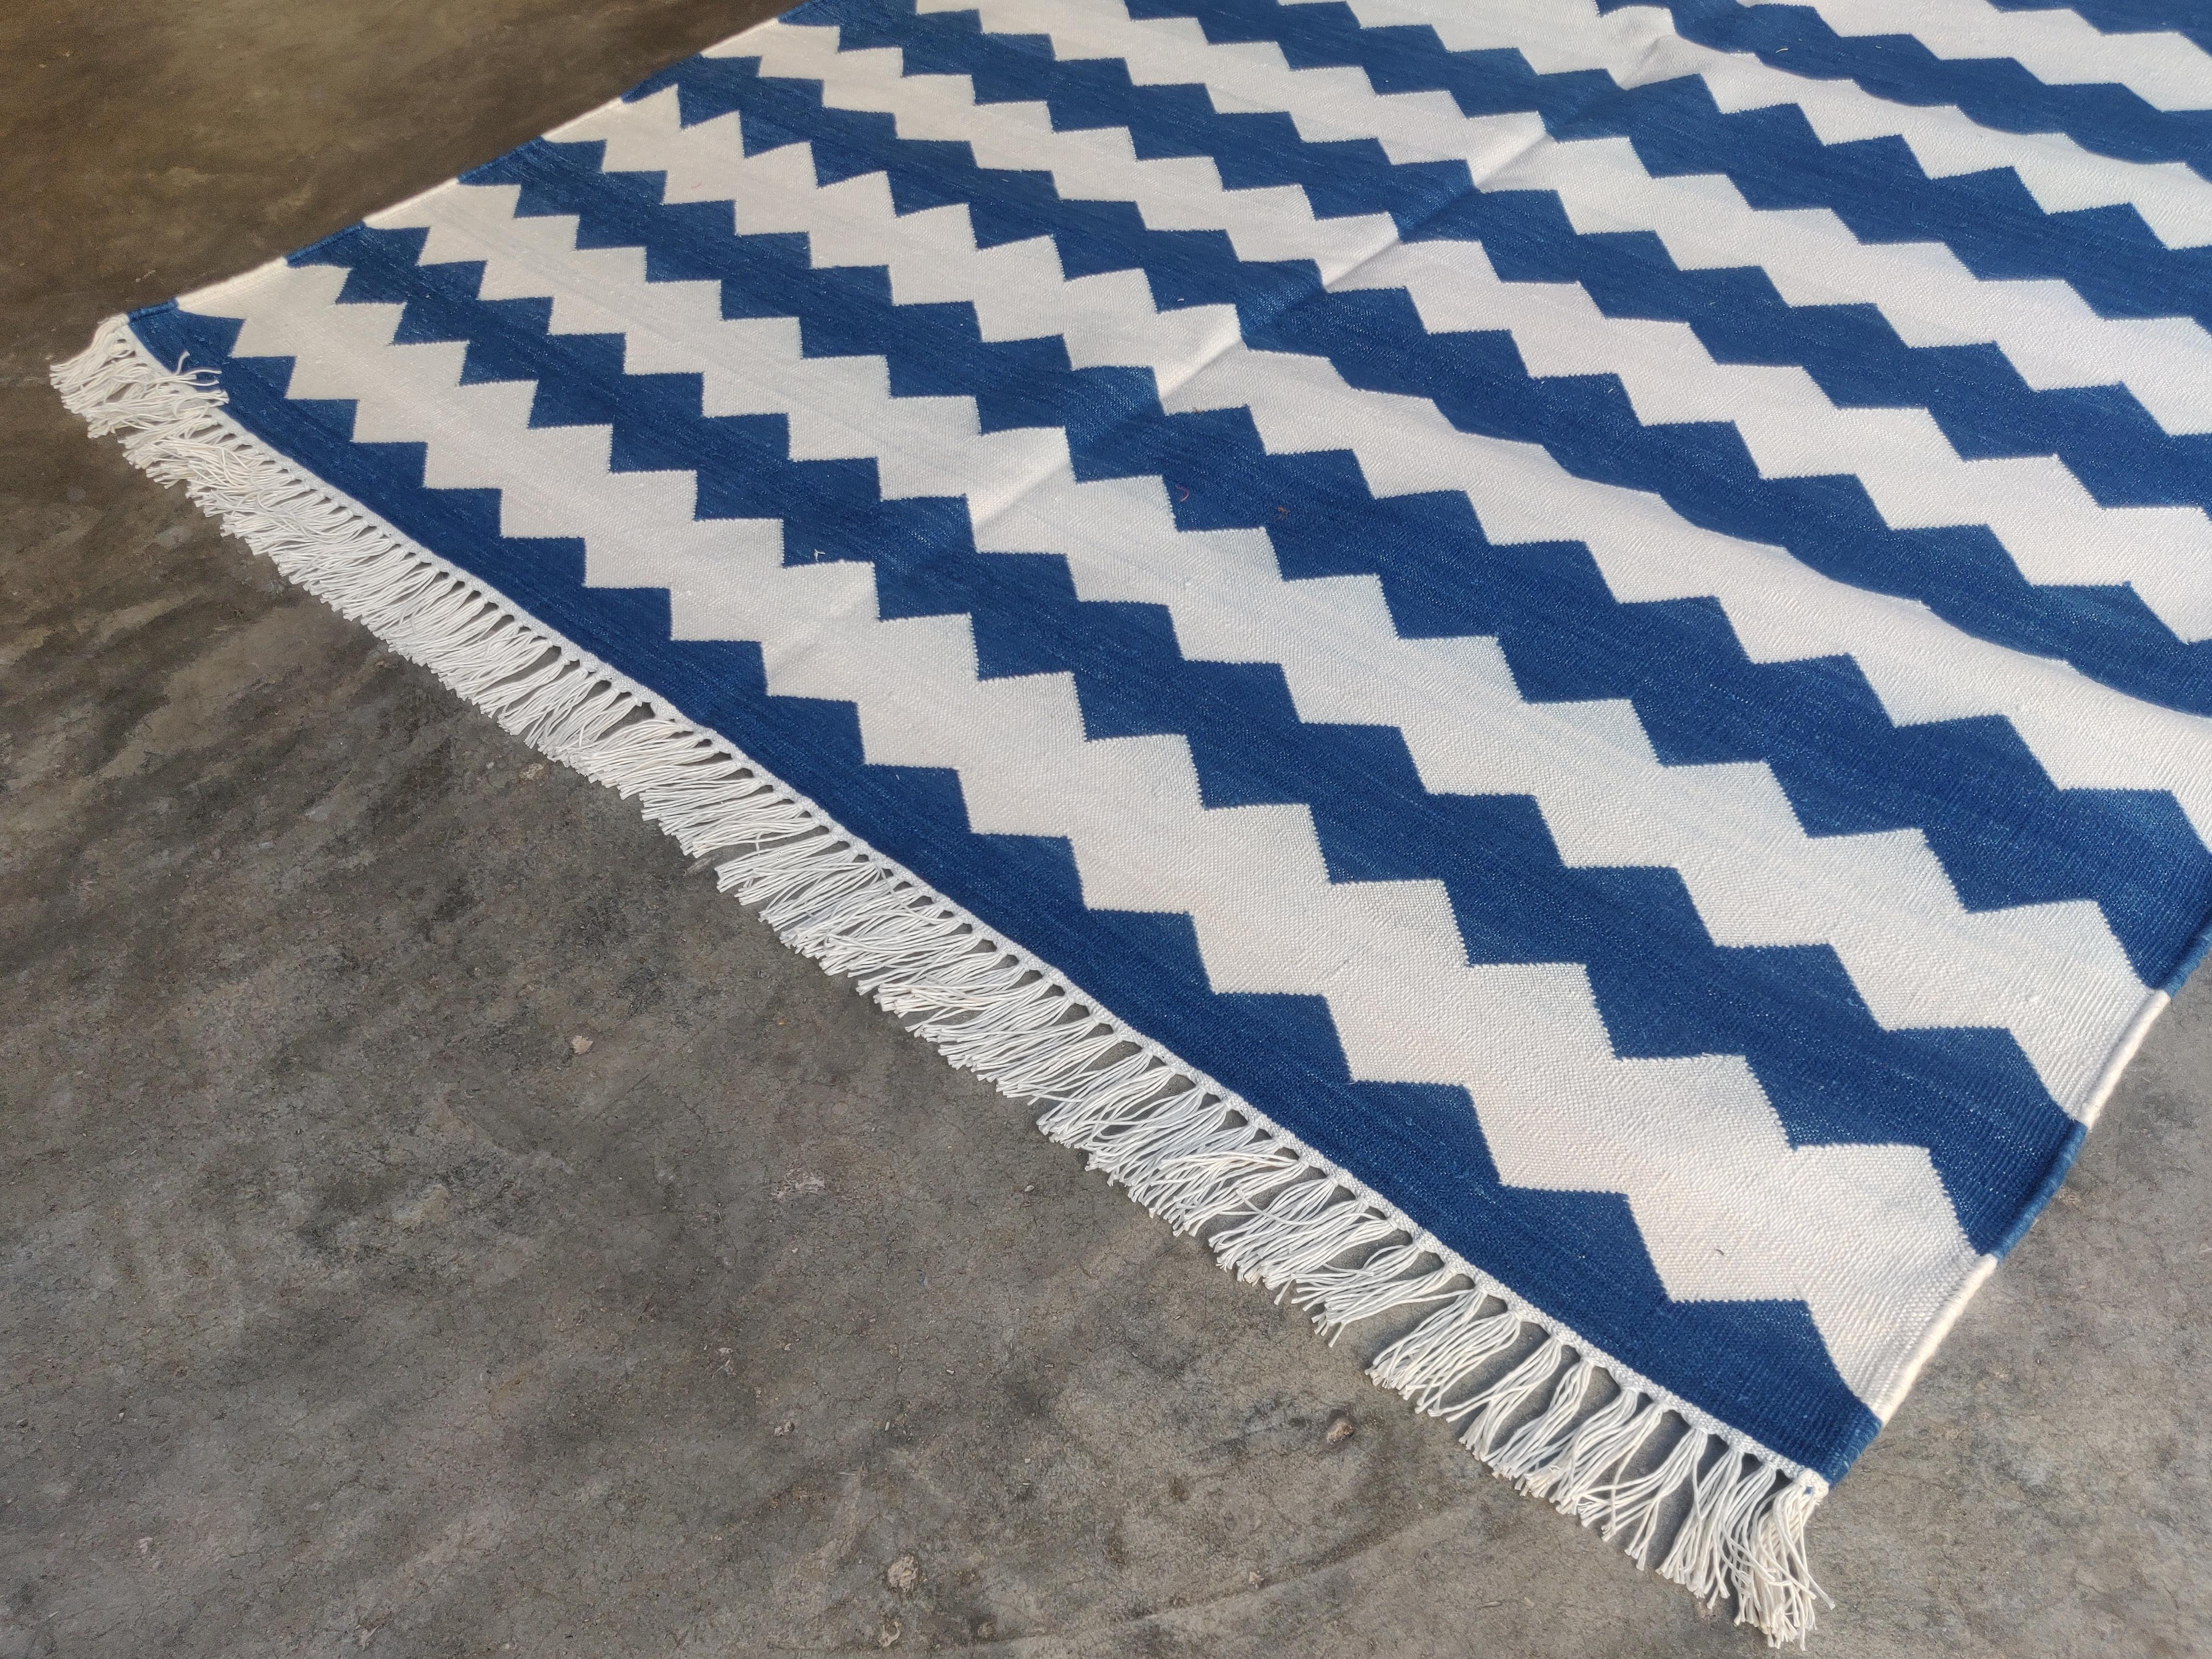 Mid-Century Modern Handmade Cotton Area Flat Weave Rug, 4x6 Blue And White Striped Indian Dhurrie For Sale